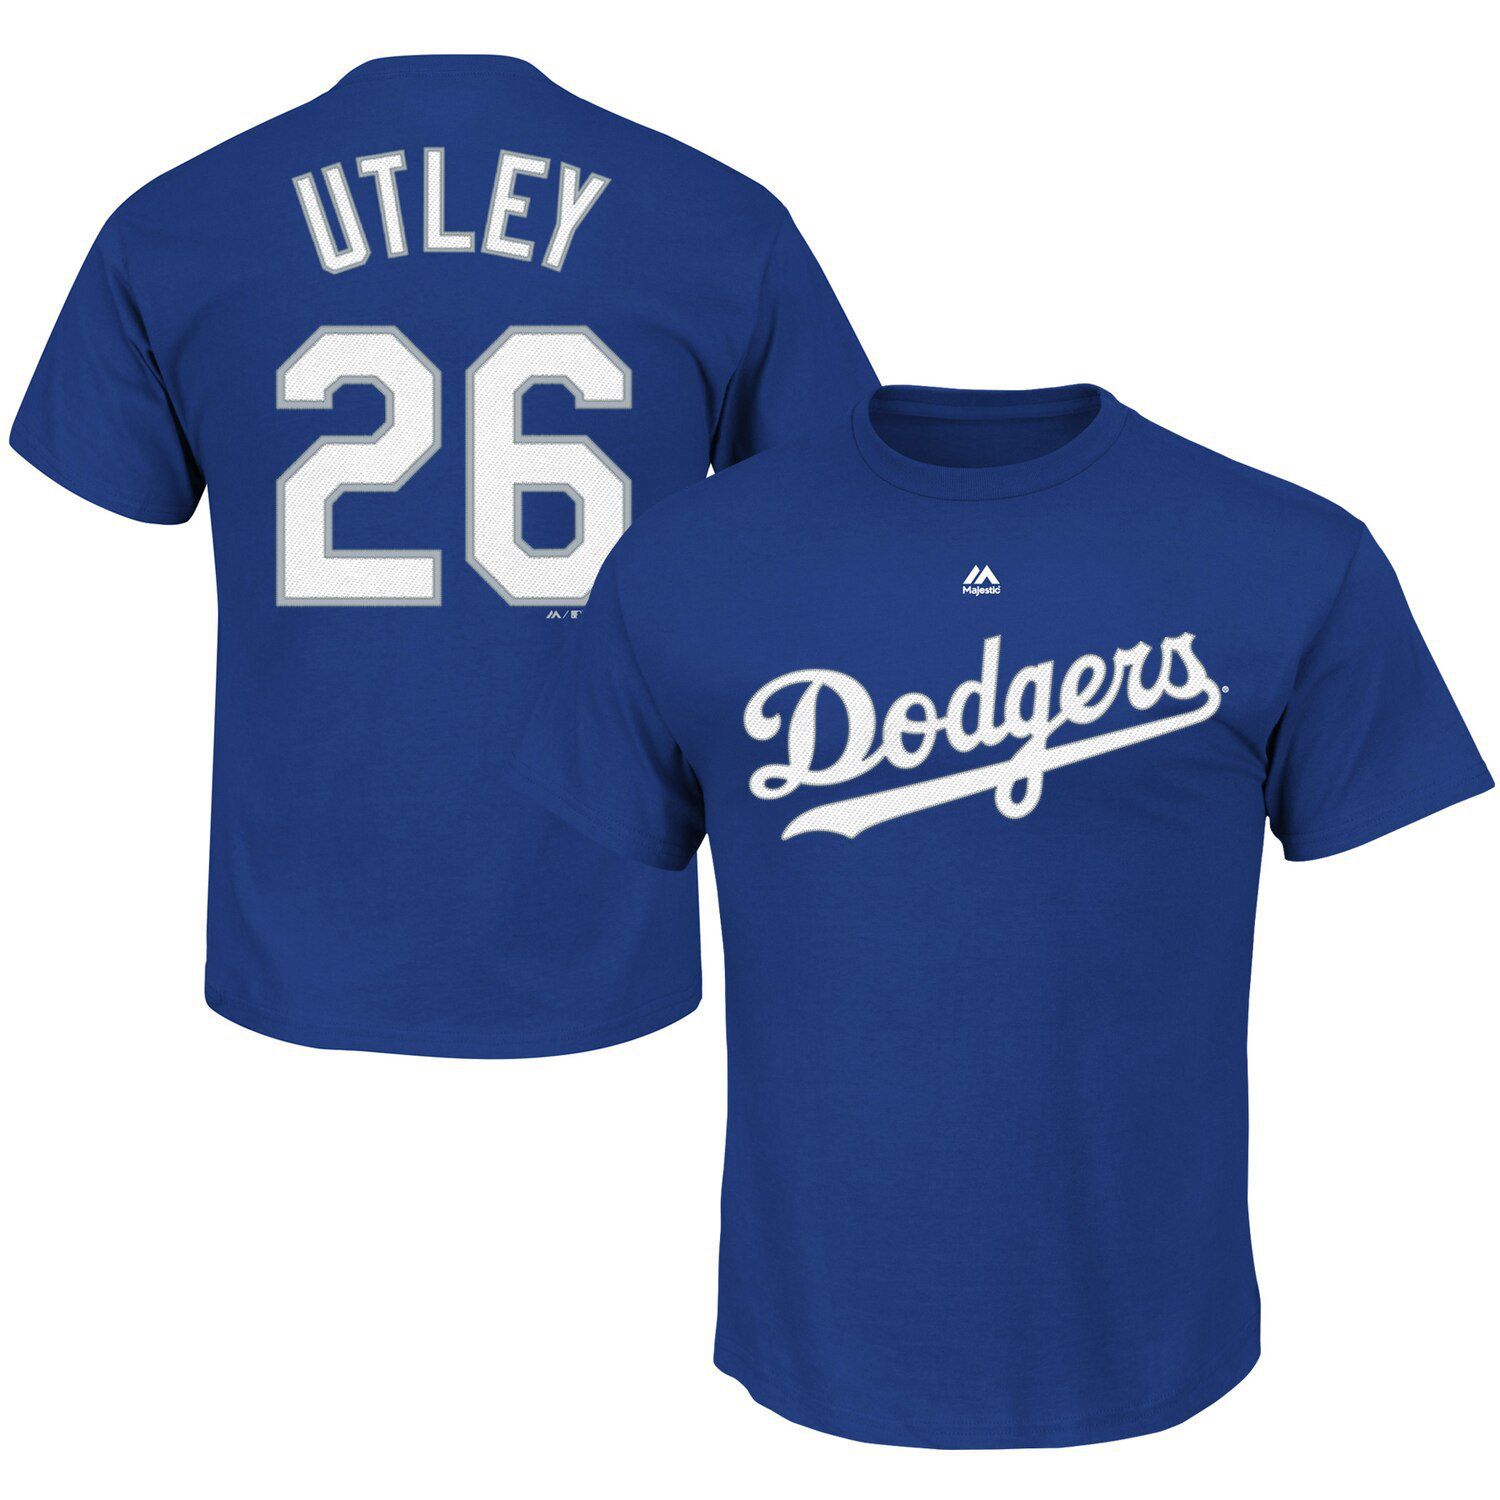 chase utley dodgers jersey